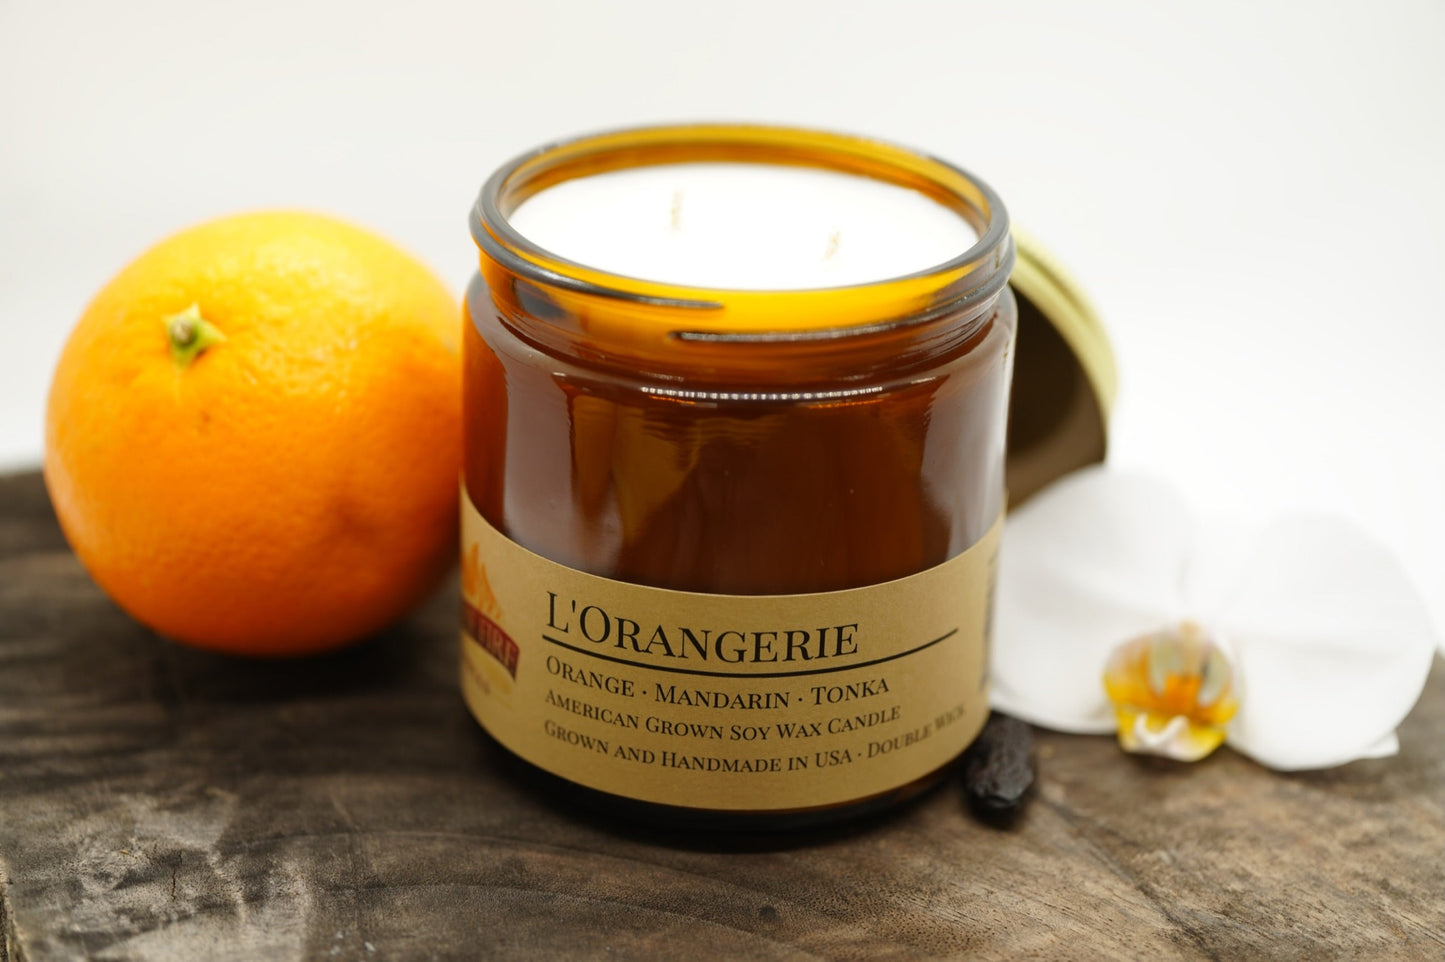 L'Orangerie Soy Candle | 16 oz Double Wick Amber Apothecary Jar